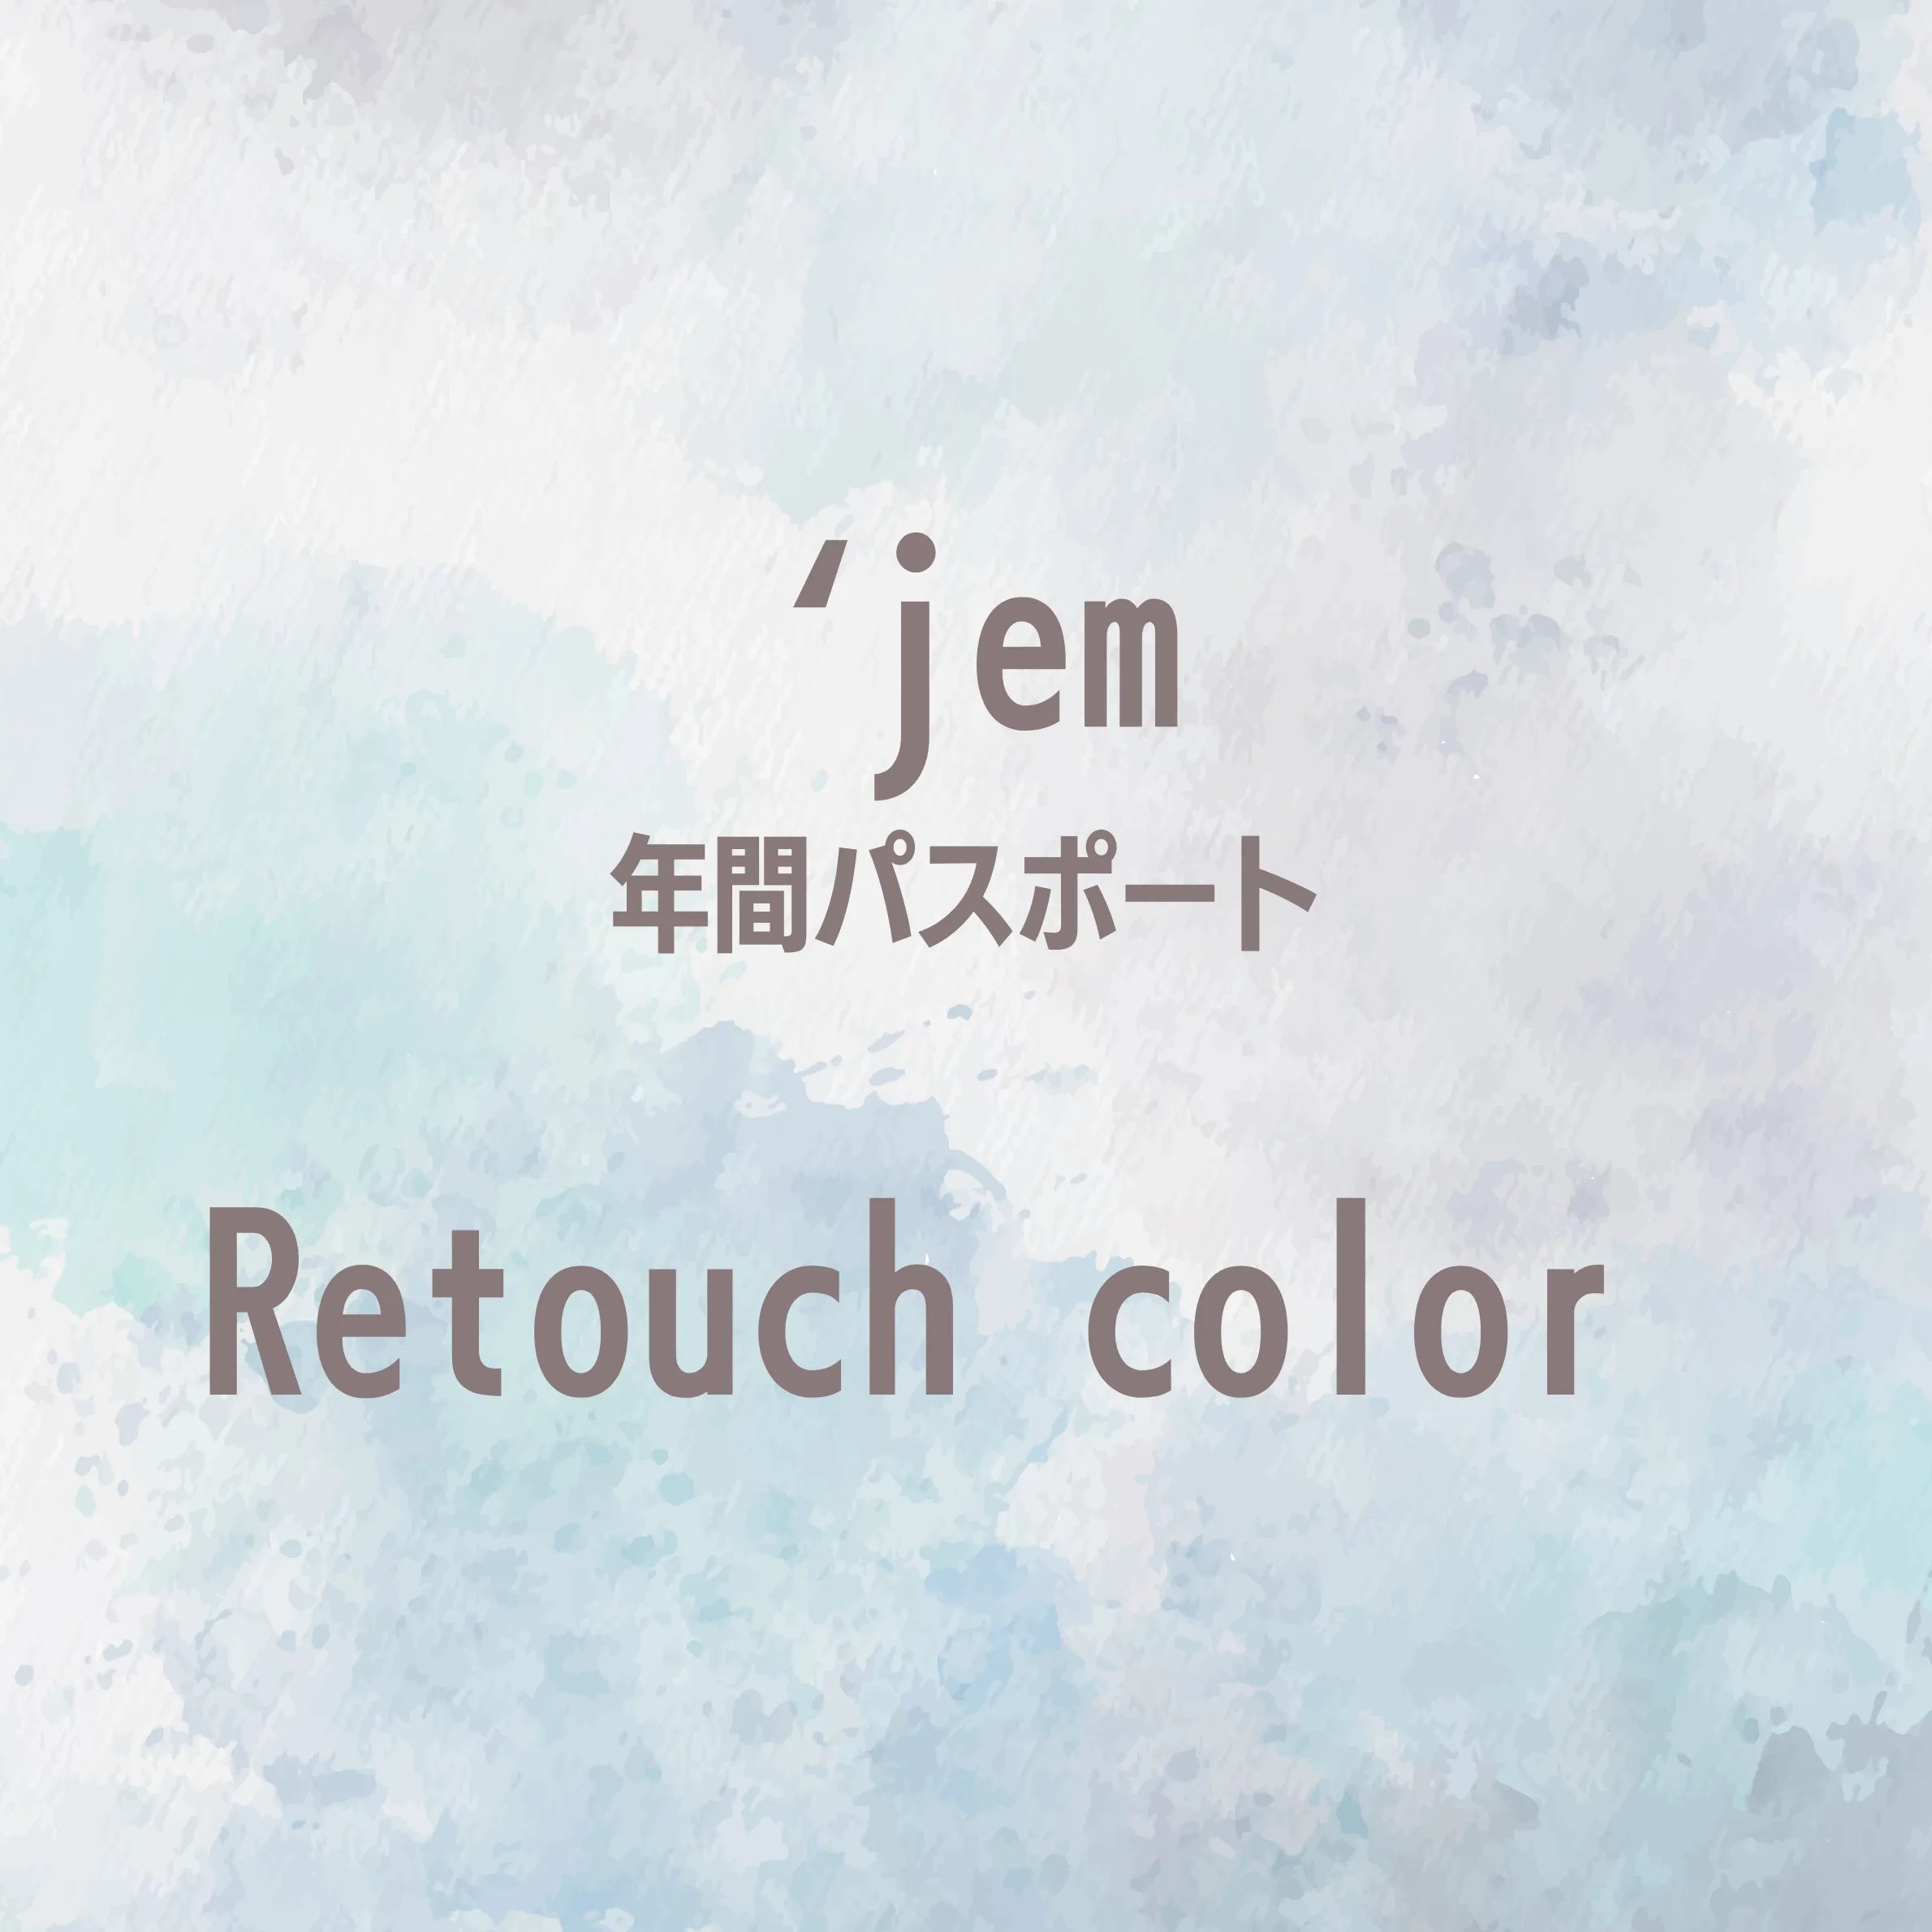 【`jem年間パスポート】Retouch color